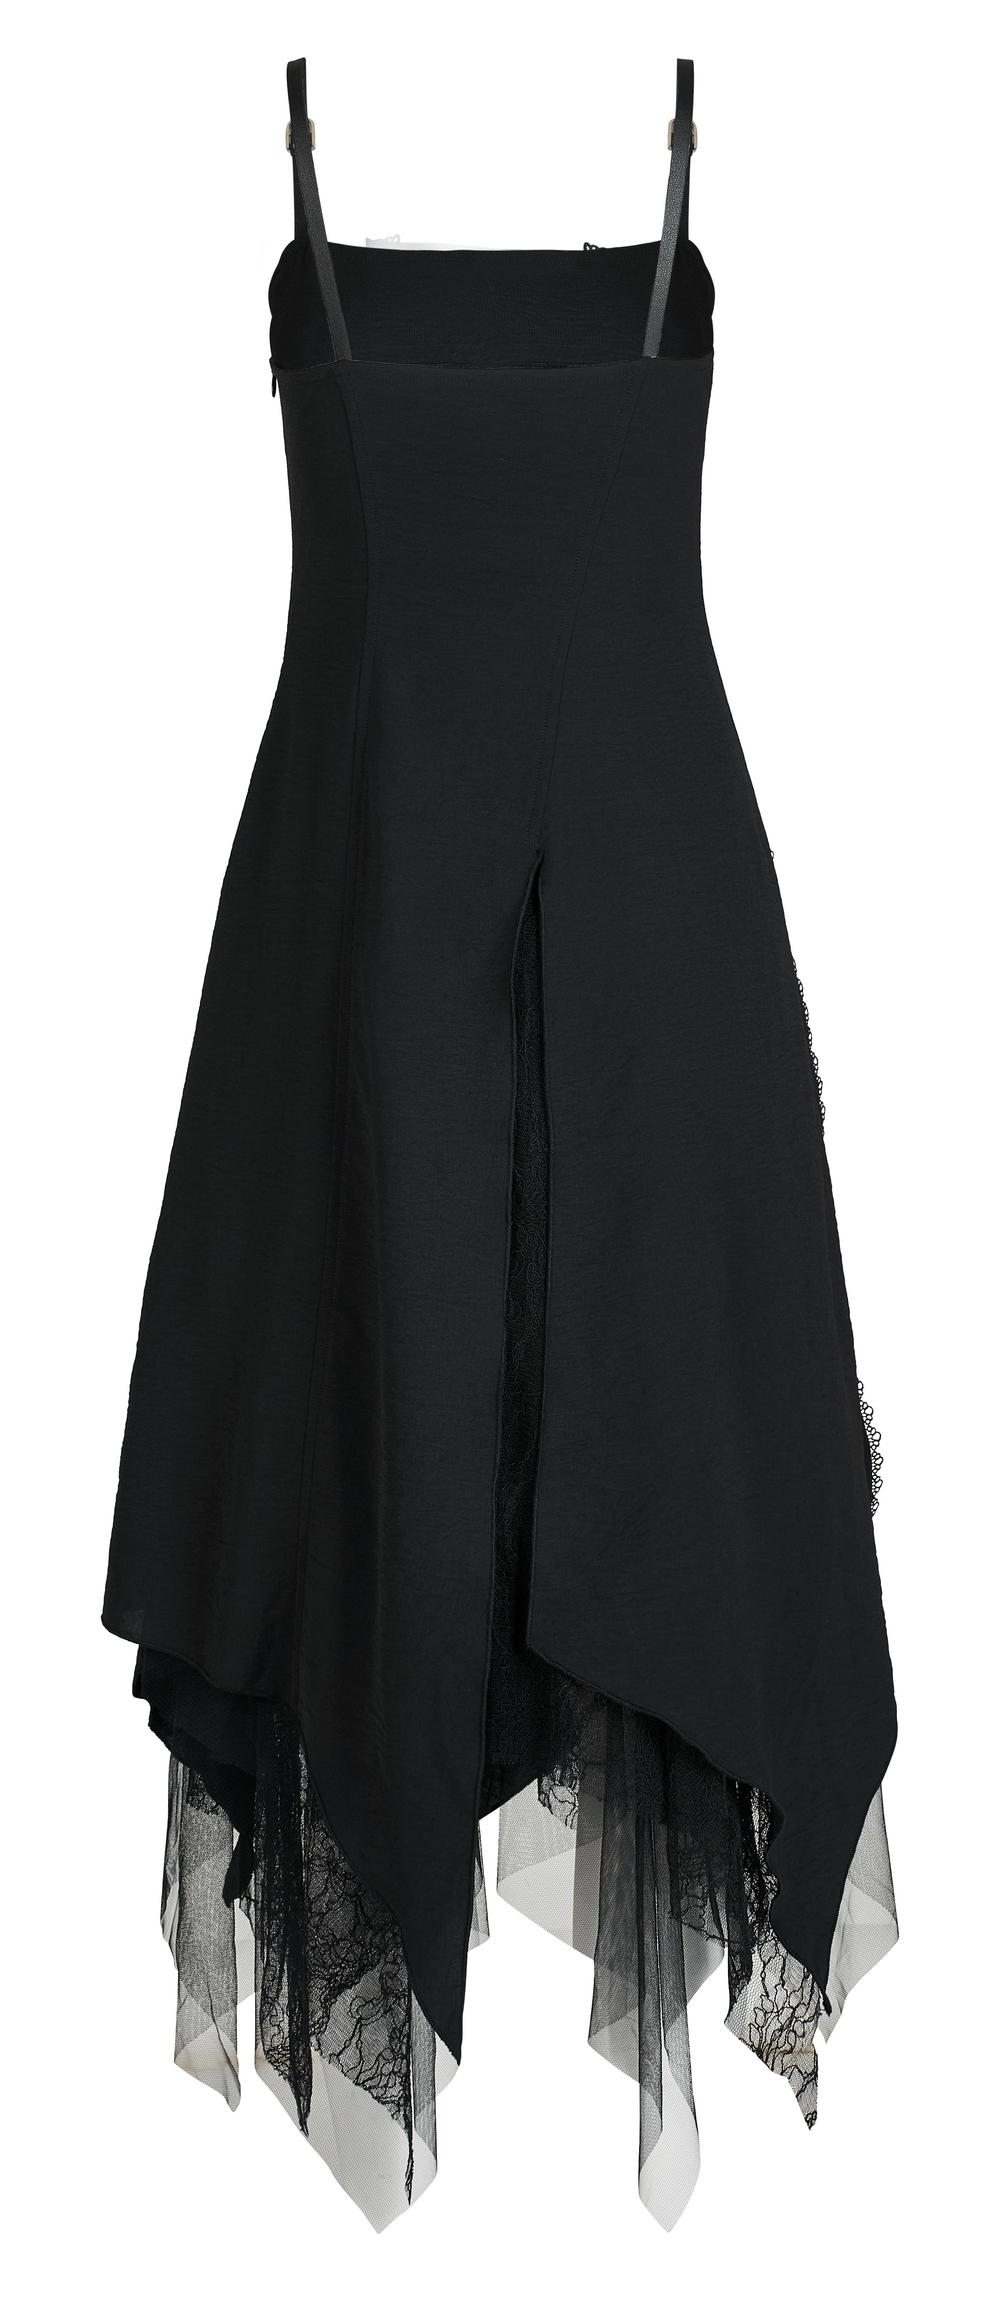 Gothic Asymmetrical Dress with Chiffon and Lace Detail